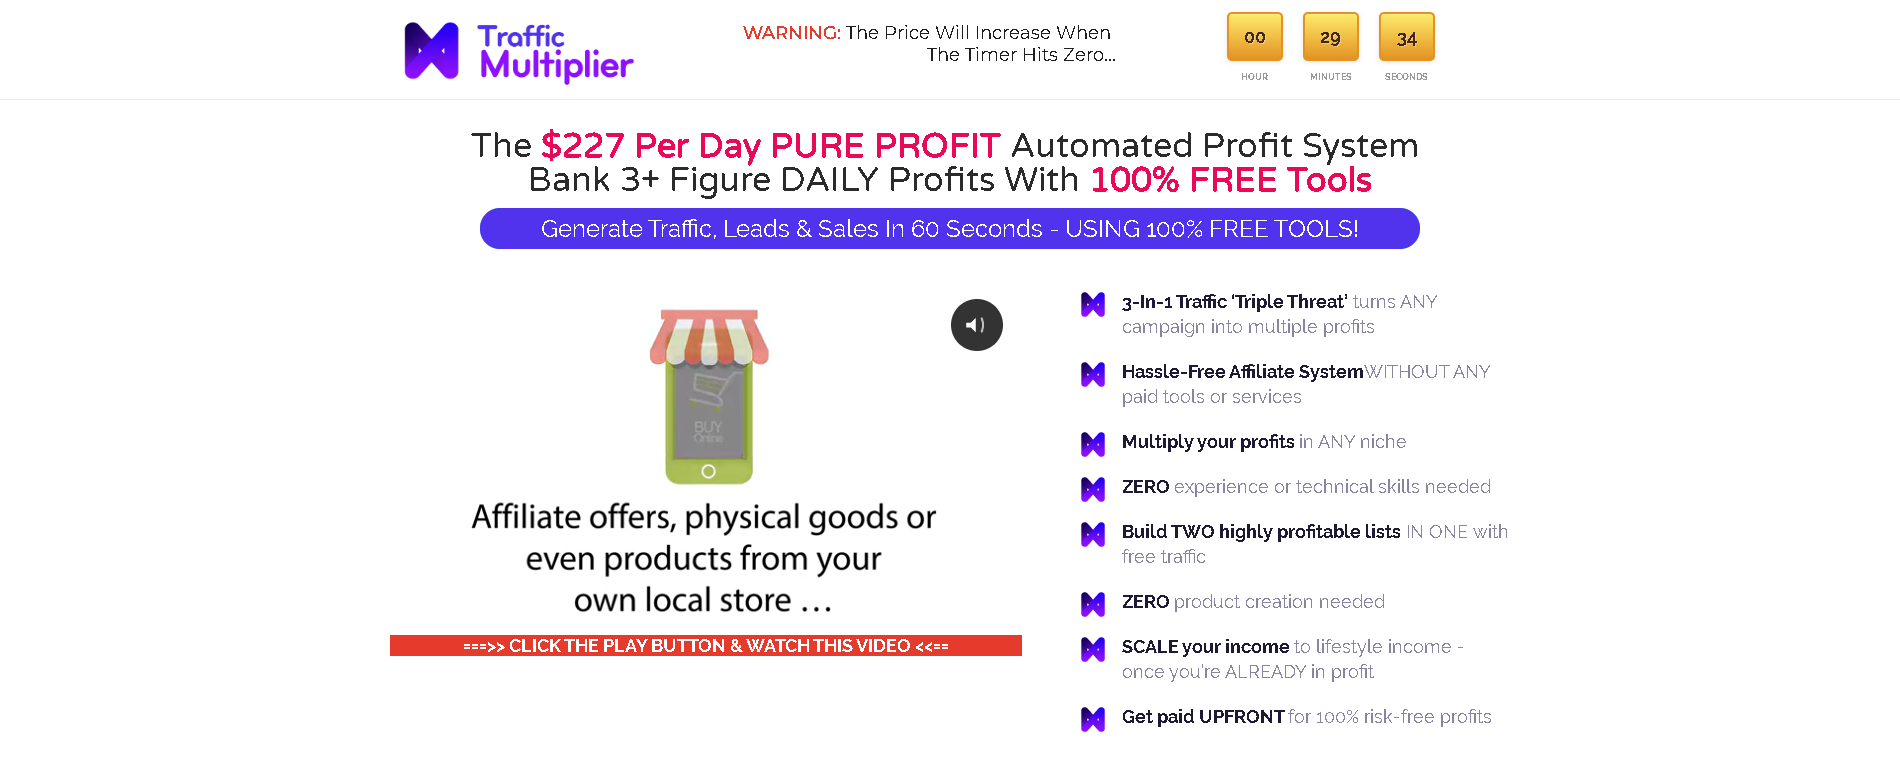 Traffic Multiplier Pro Scam Review